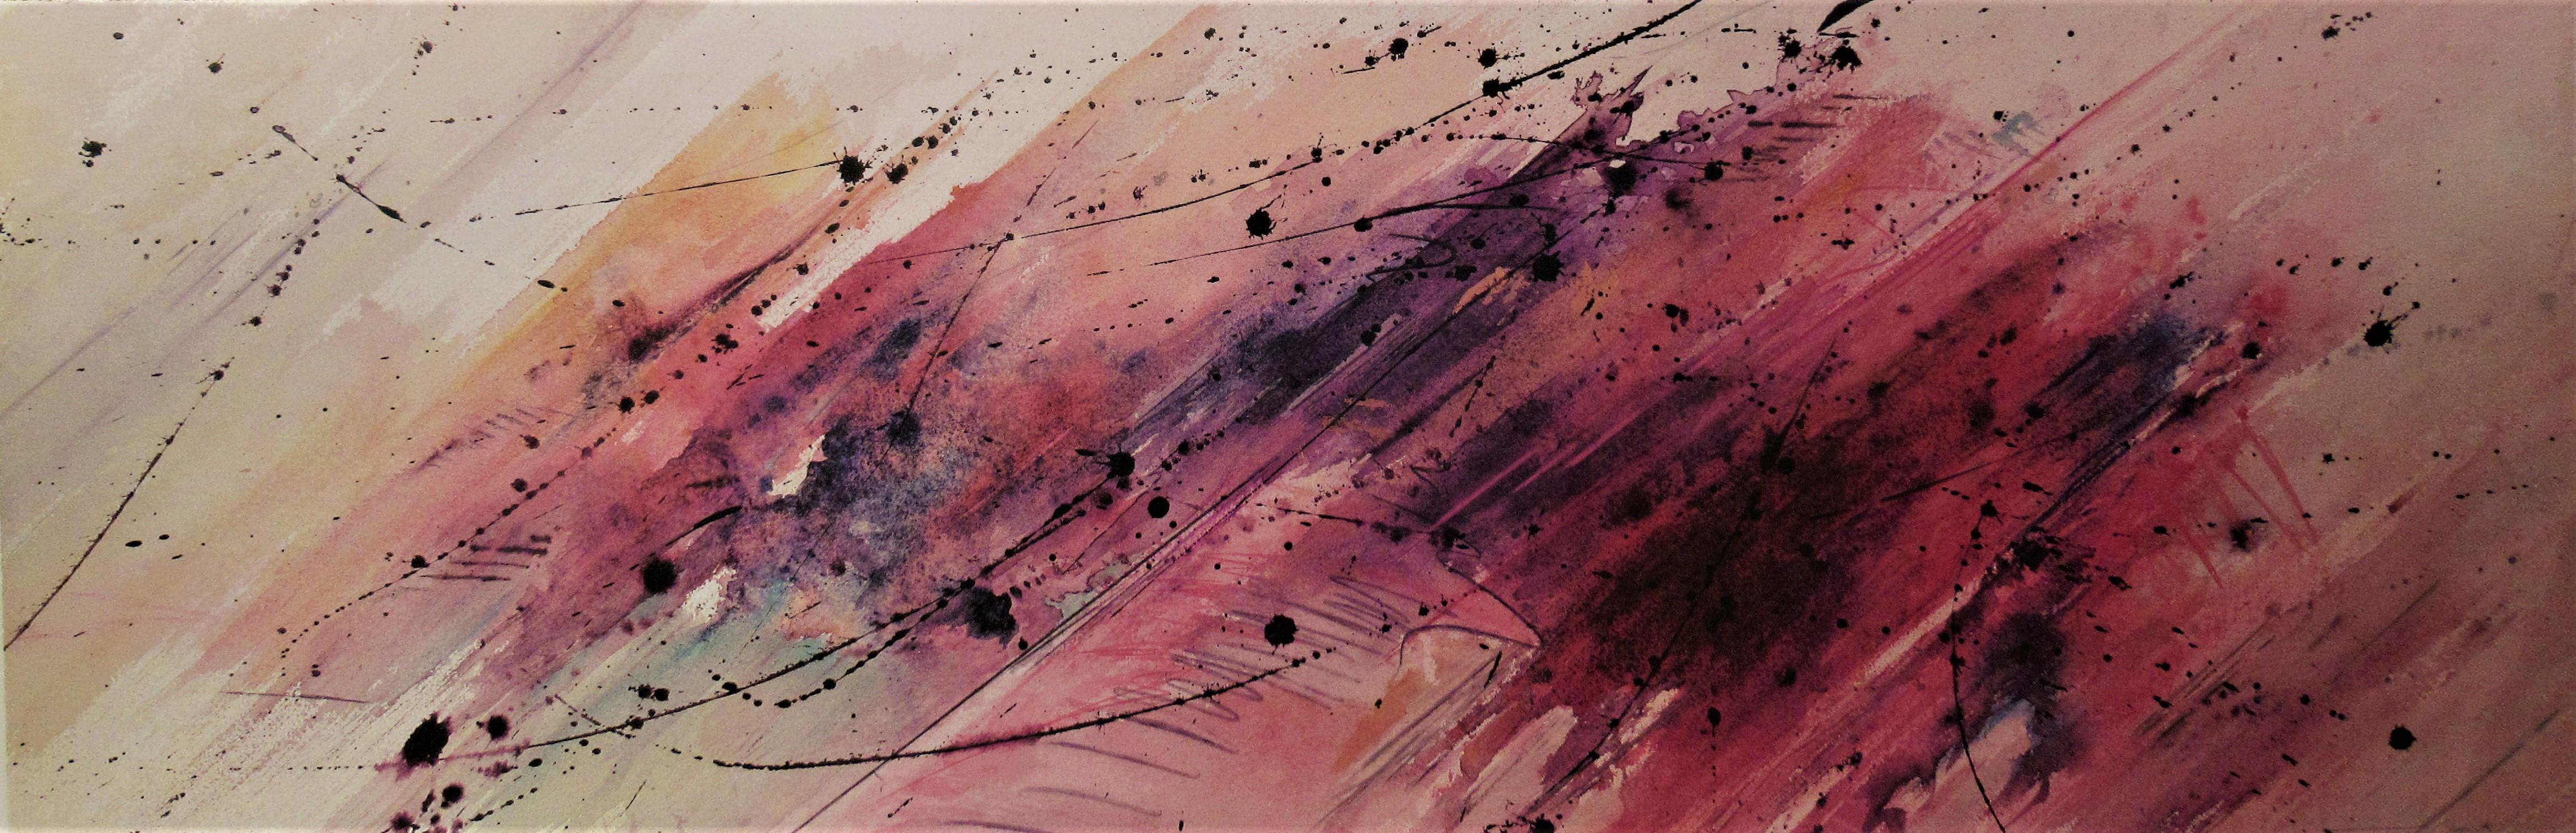 Terry Leftrook Abstract Print - Untitled